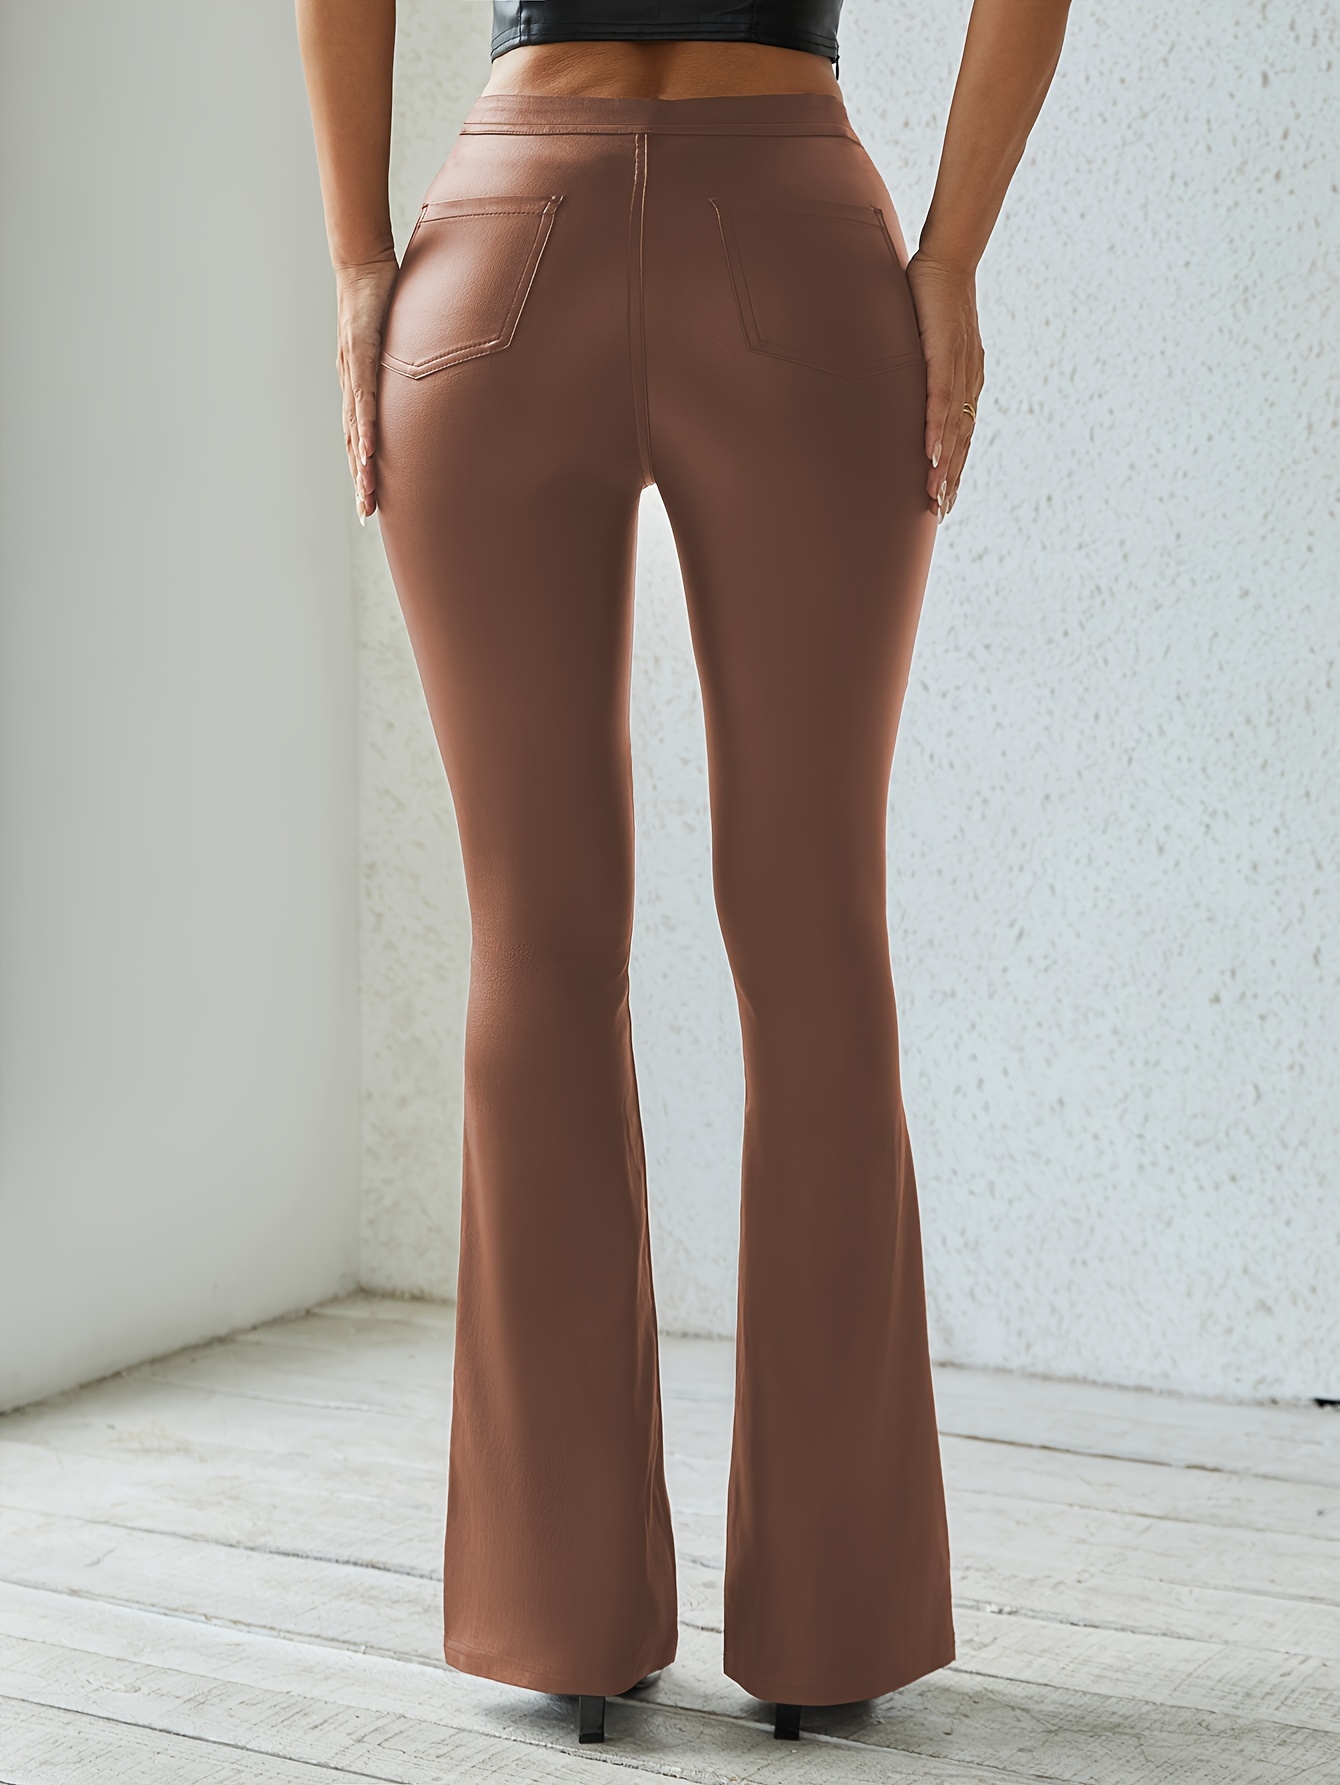 High waisted brown flare pants, Women's Fashion, Bottoms, Other